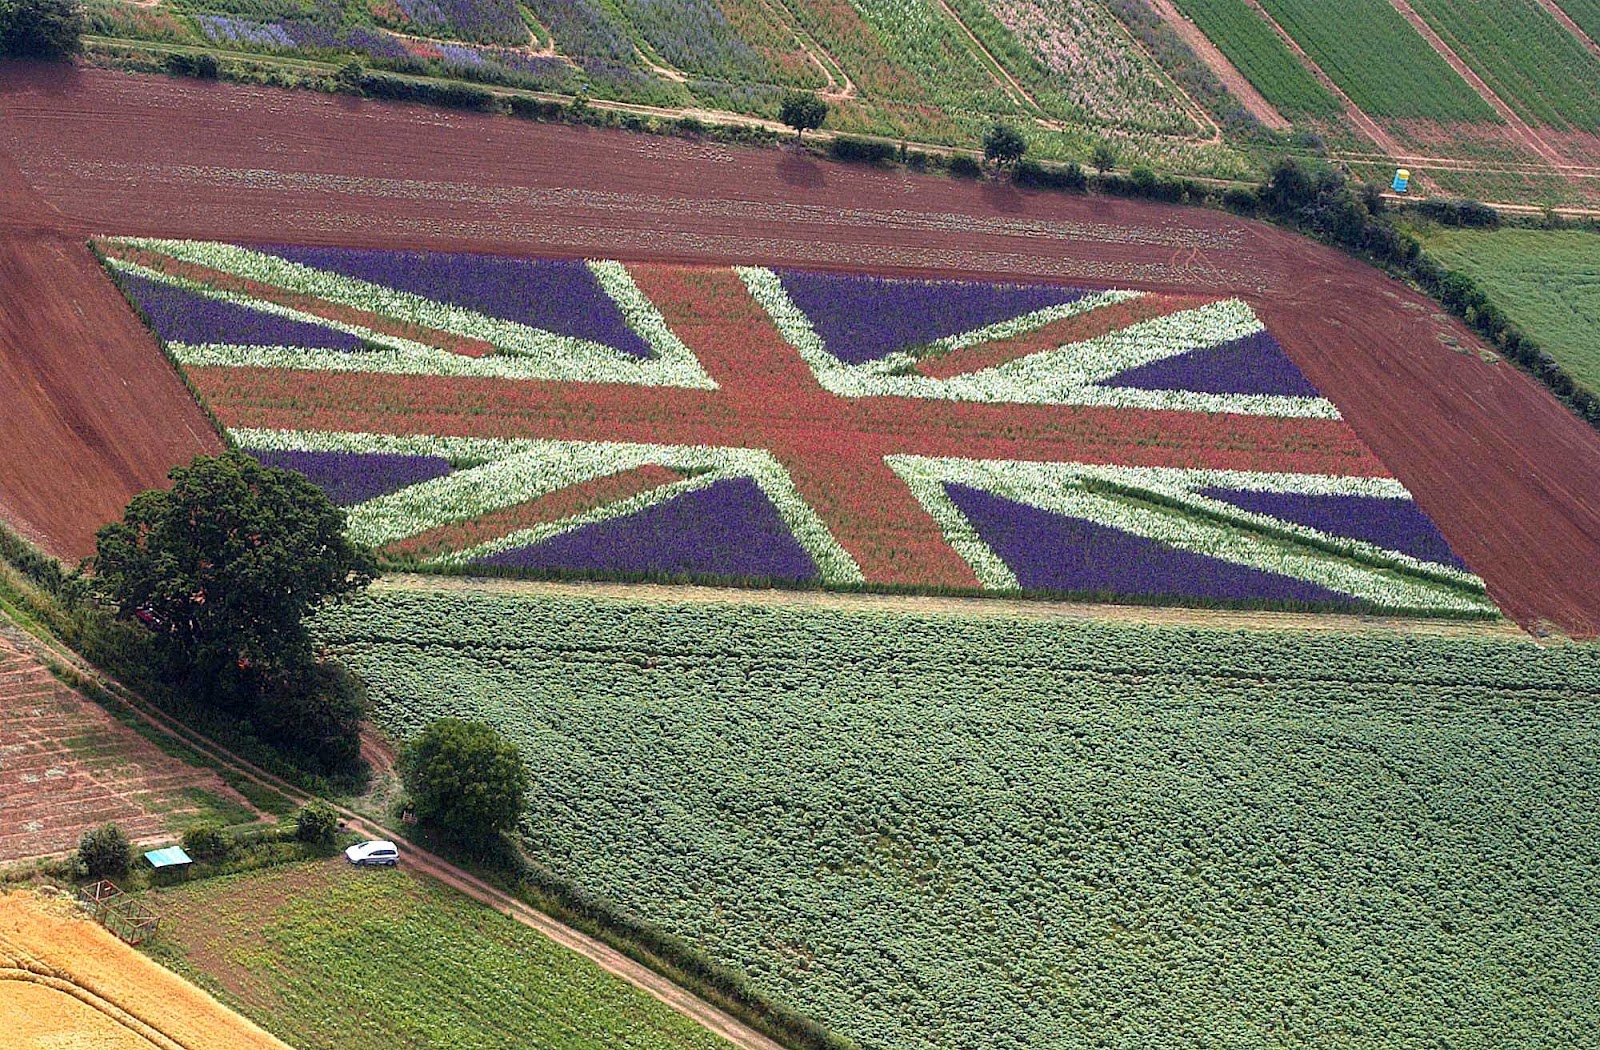 The EU referendum is a hot topic in the farming community, with opinion split